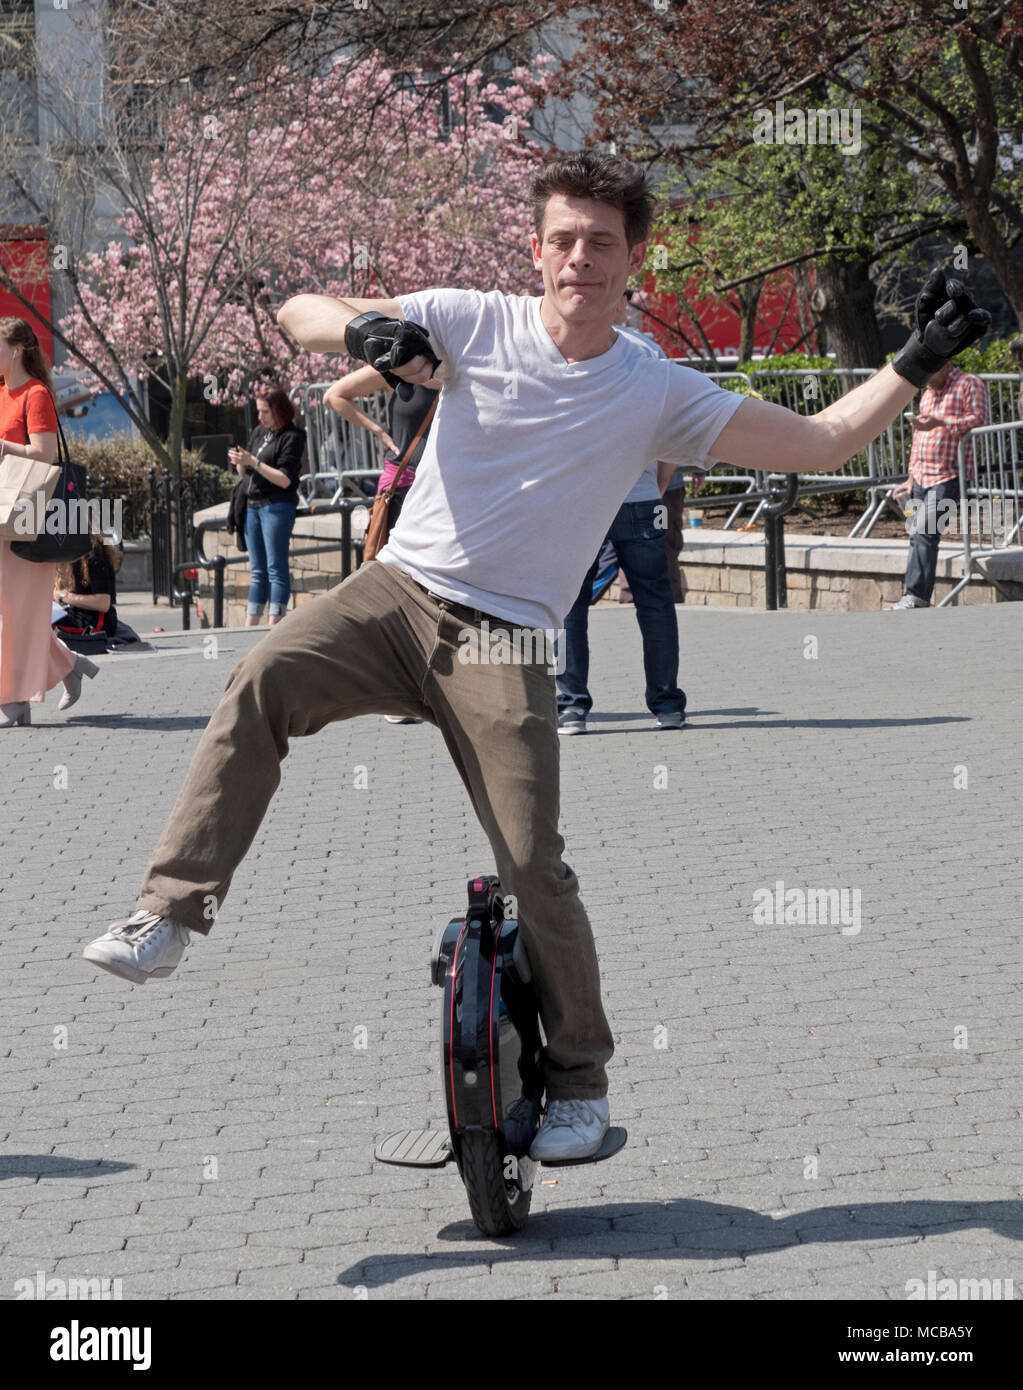 An Englishman living in New York riding an electric unicycle in Union Square Park in Manhattan, New York City. Stock Photo